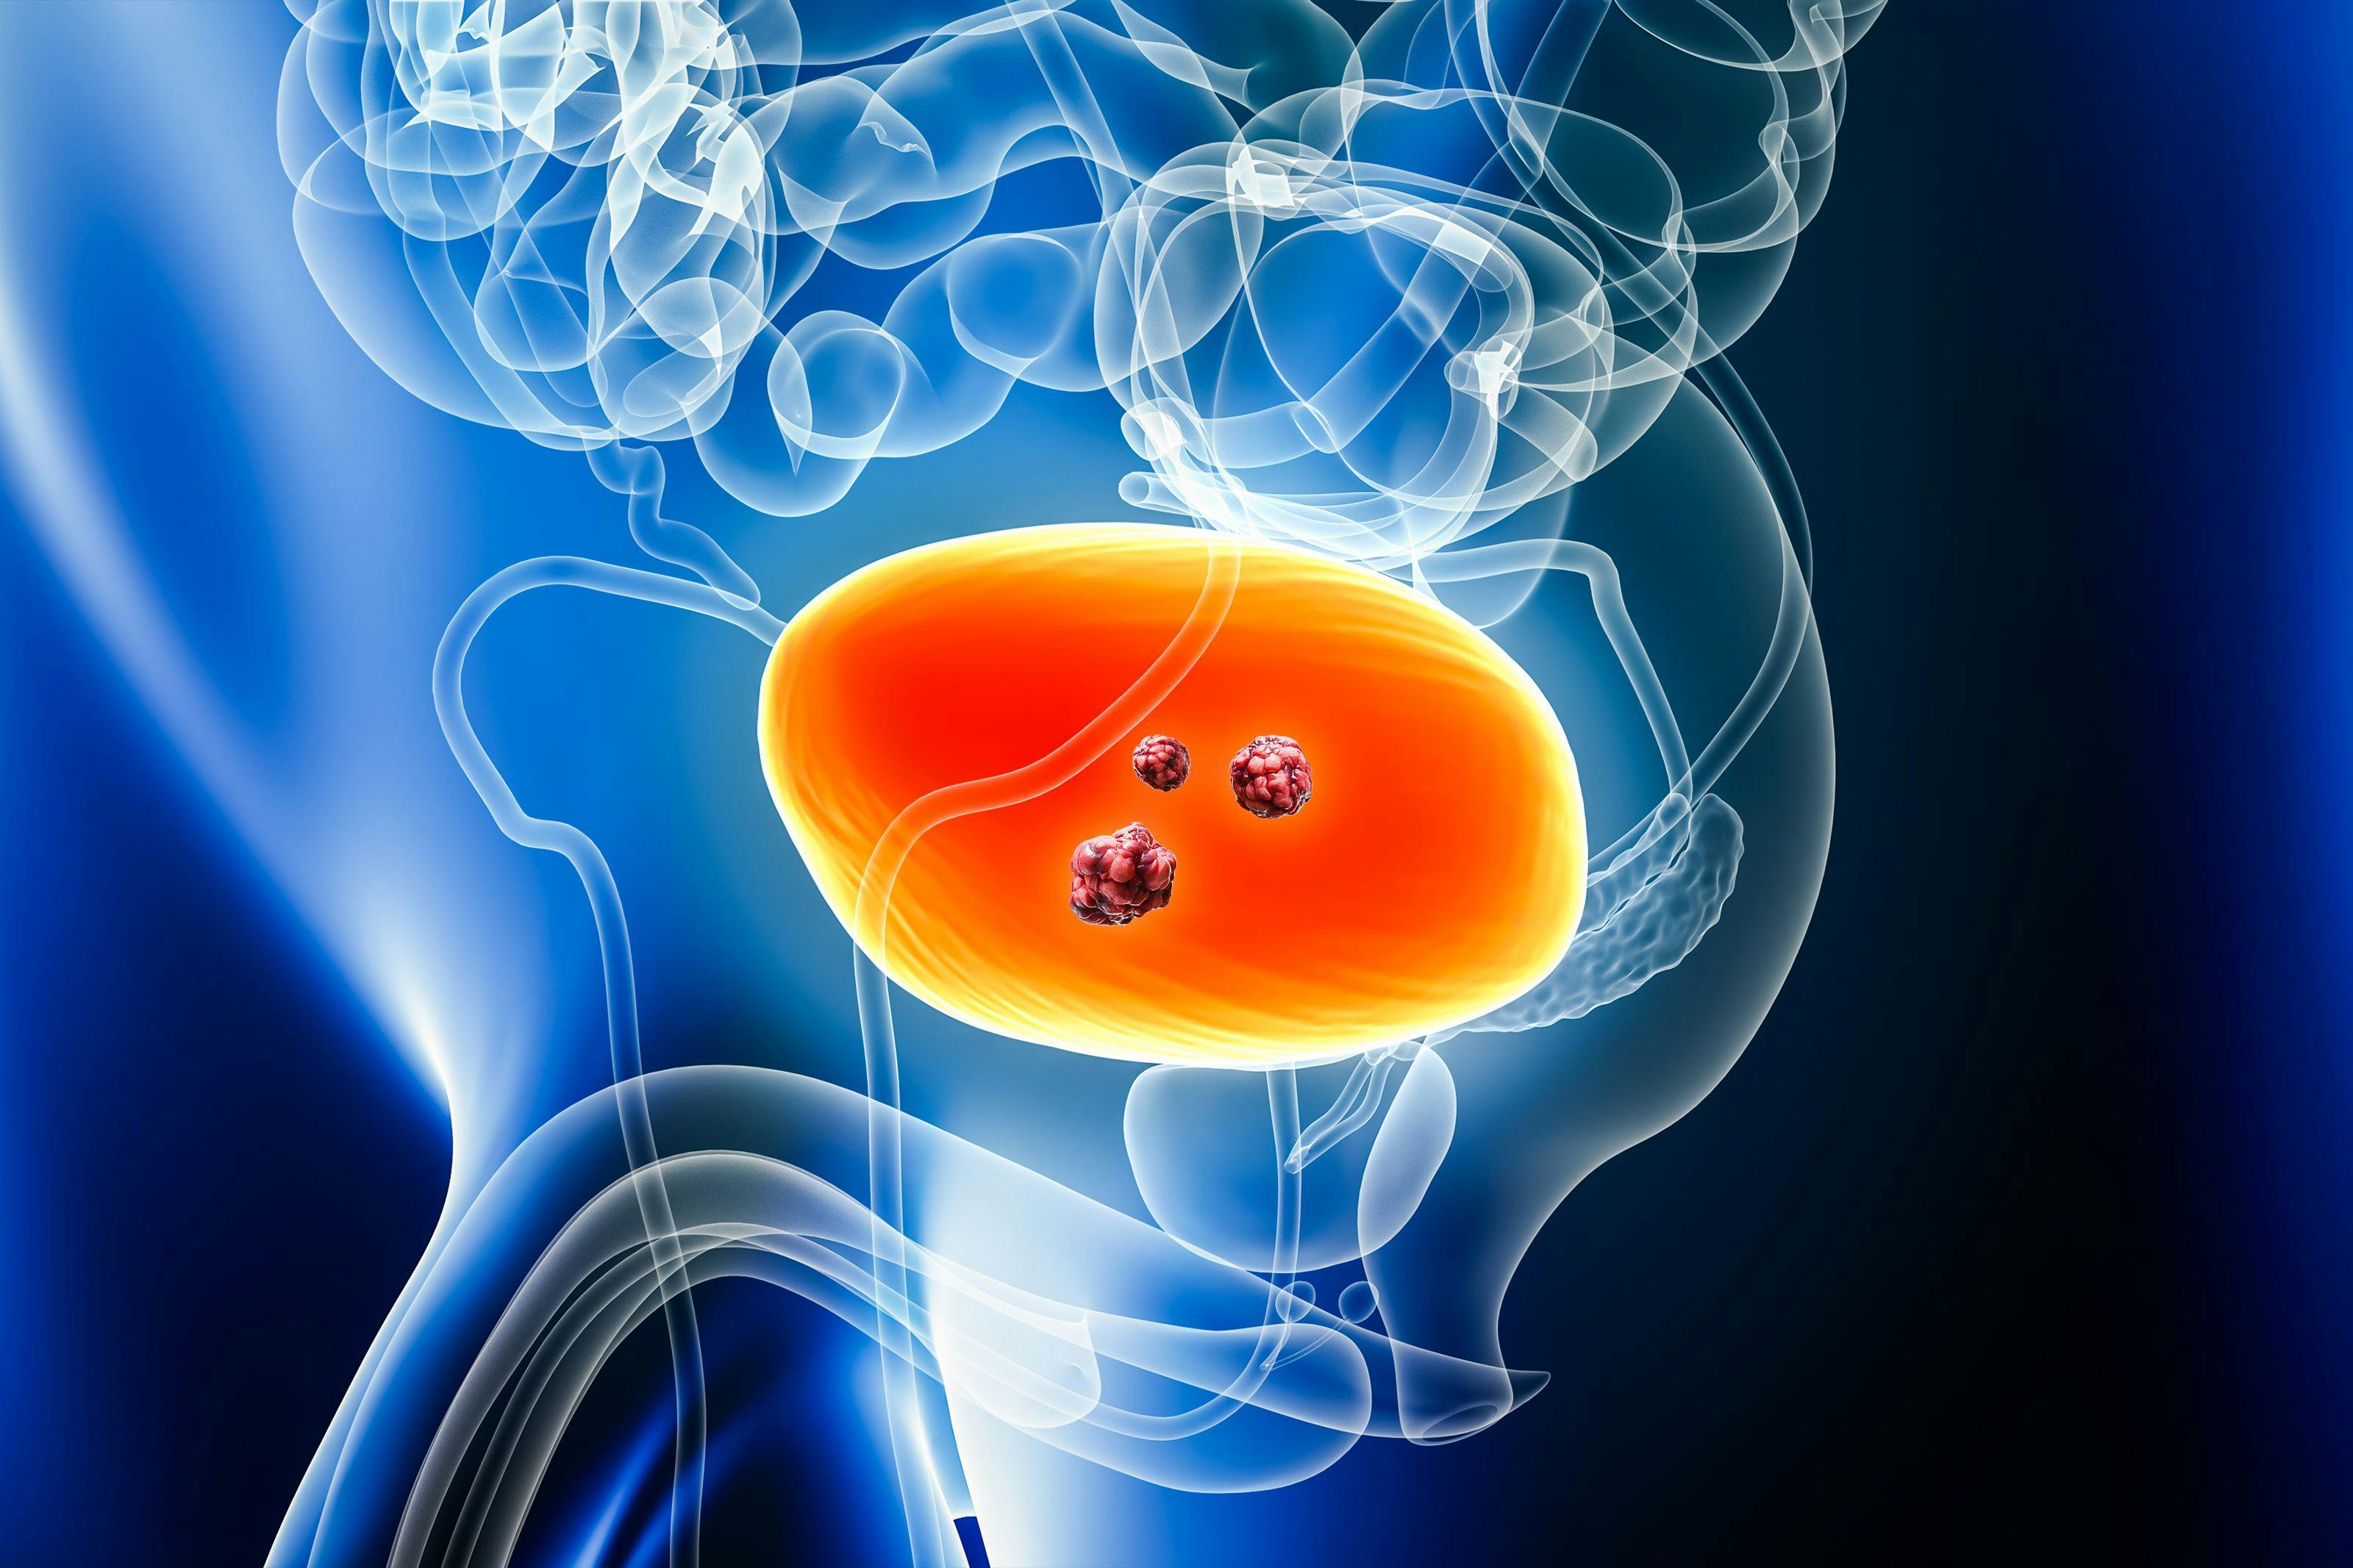 Urinary bladder cancer with organs and tumors or cancerous cells 3D rendering illustration with male body. Anatomy, oncology, biomedical, disease, medical, biology, science, healthcare concepts. | Image Credt: © Matthieu -  [stock.adobe.com]